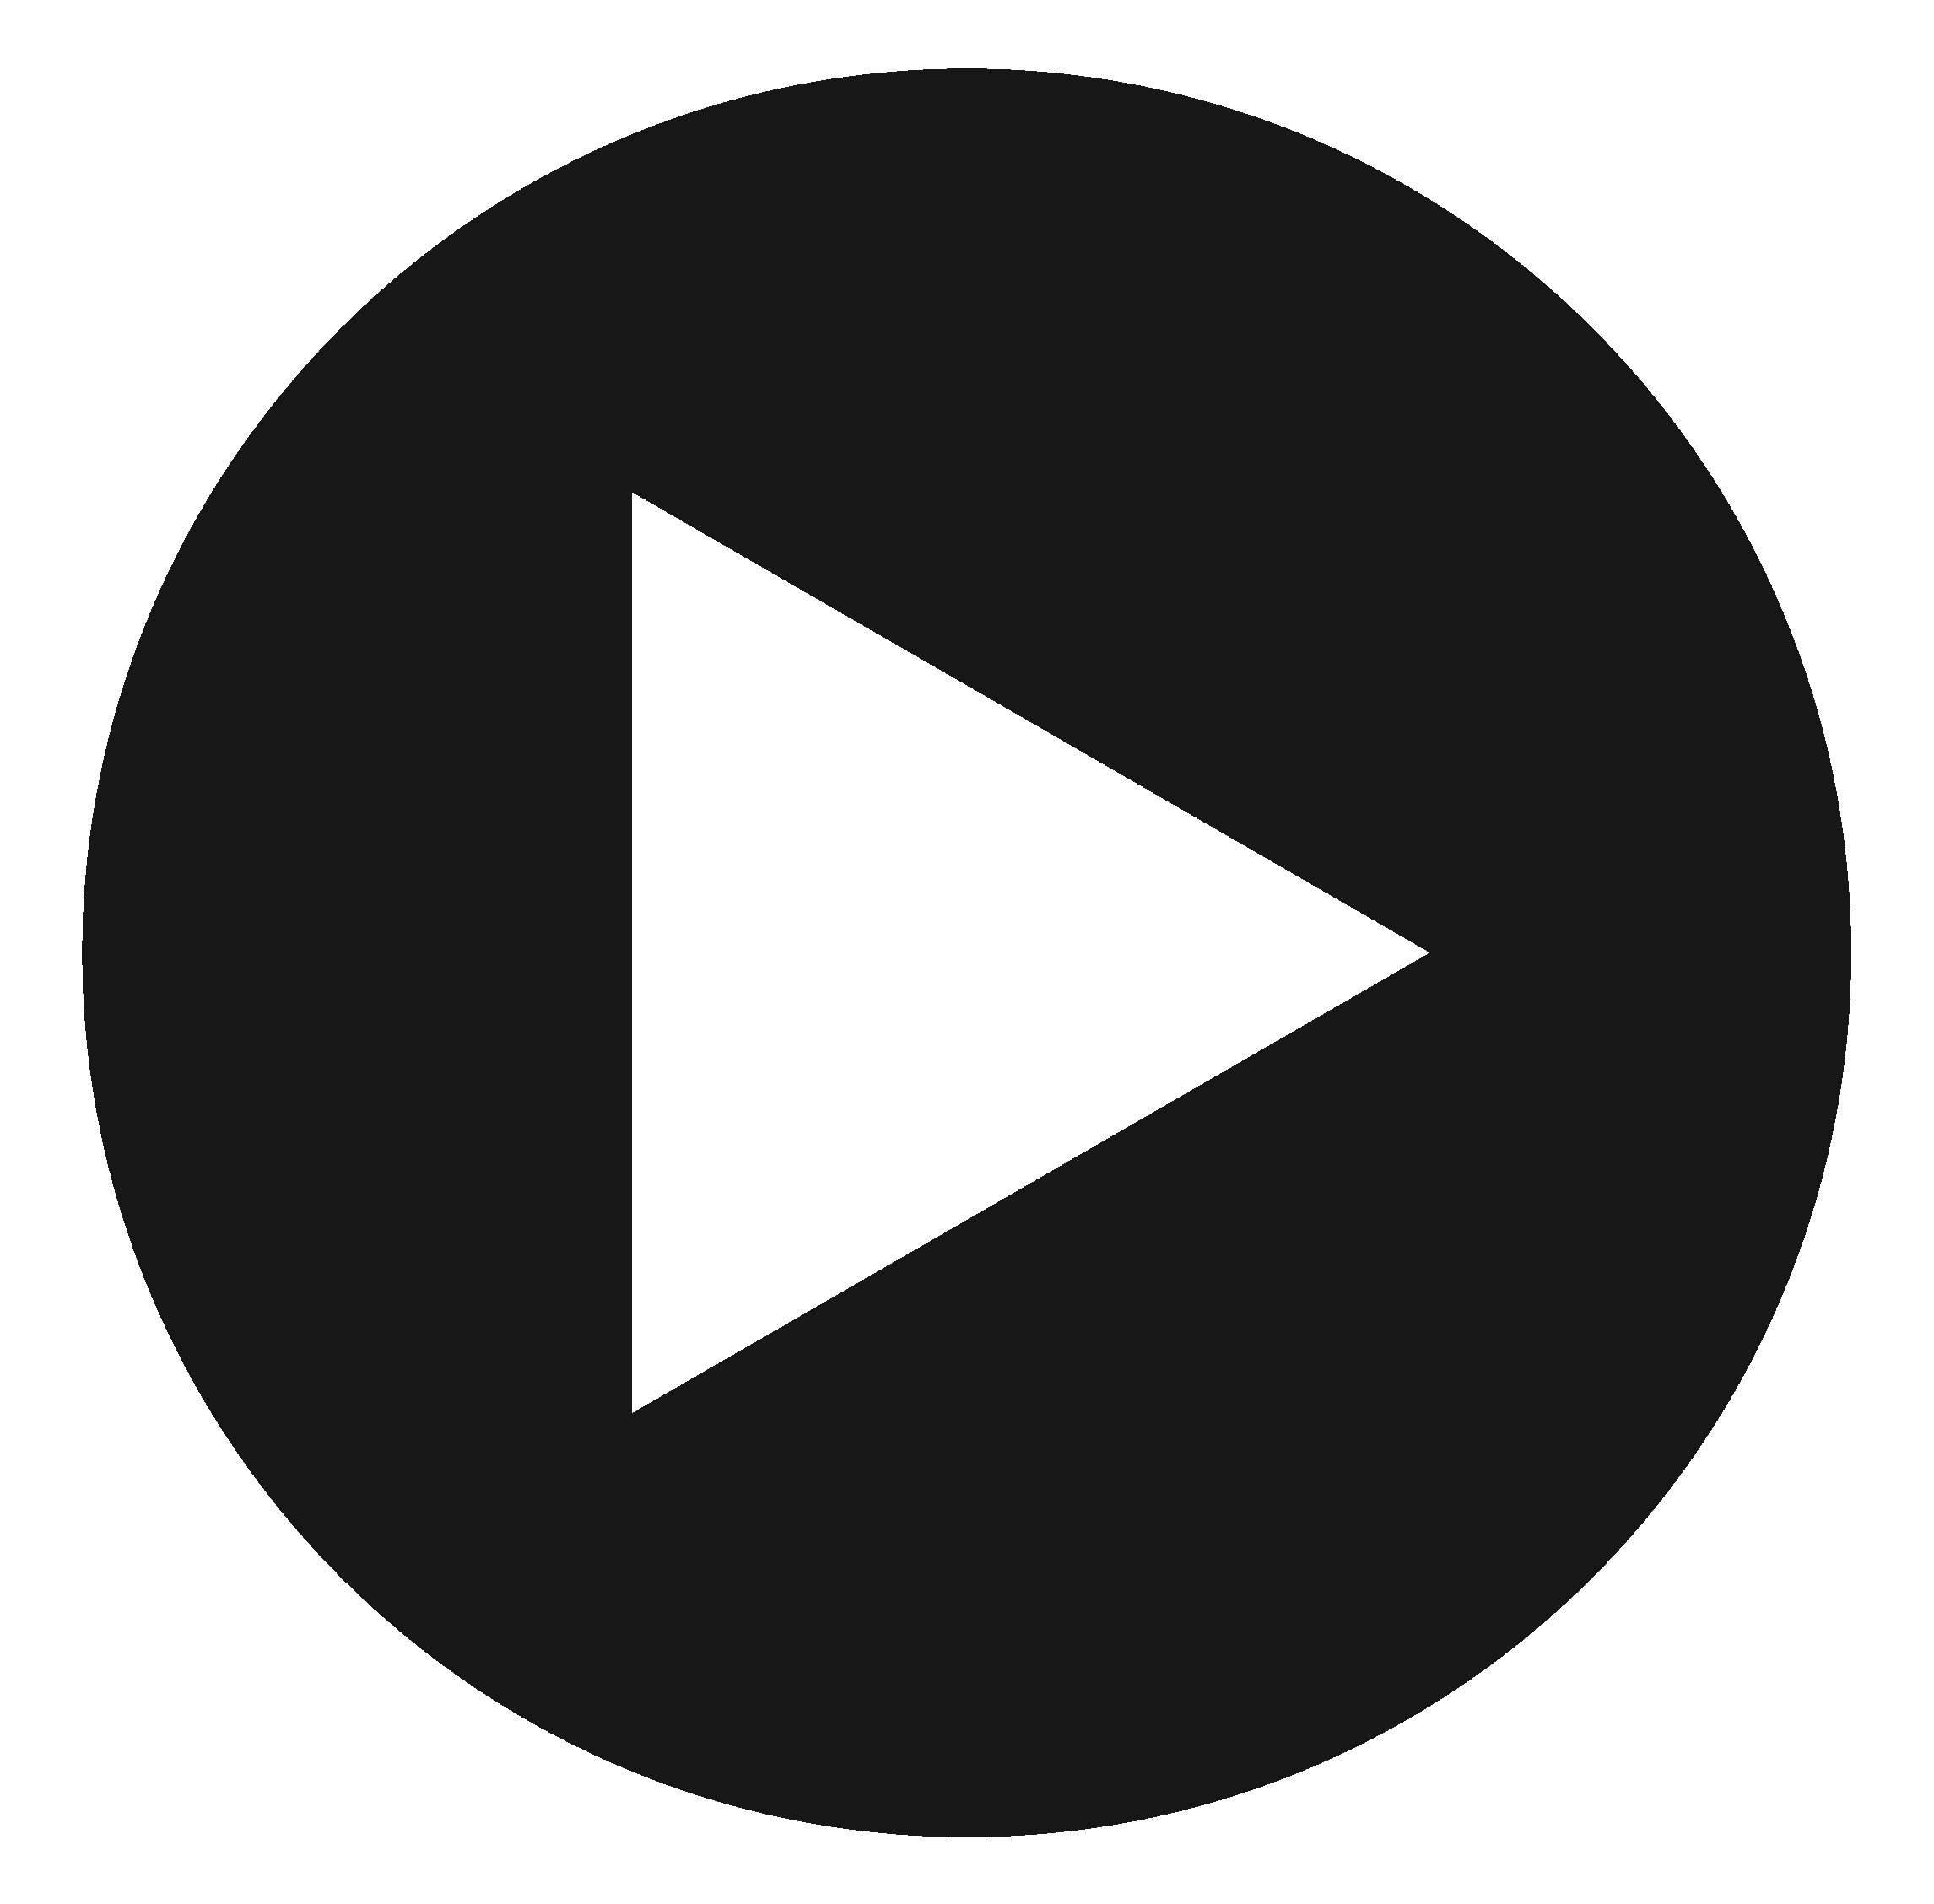 Free Youtube Play Button, Download Free Clip Art, Free Clip.